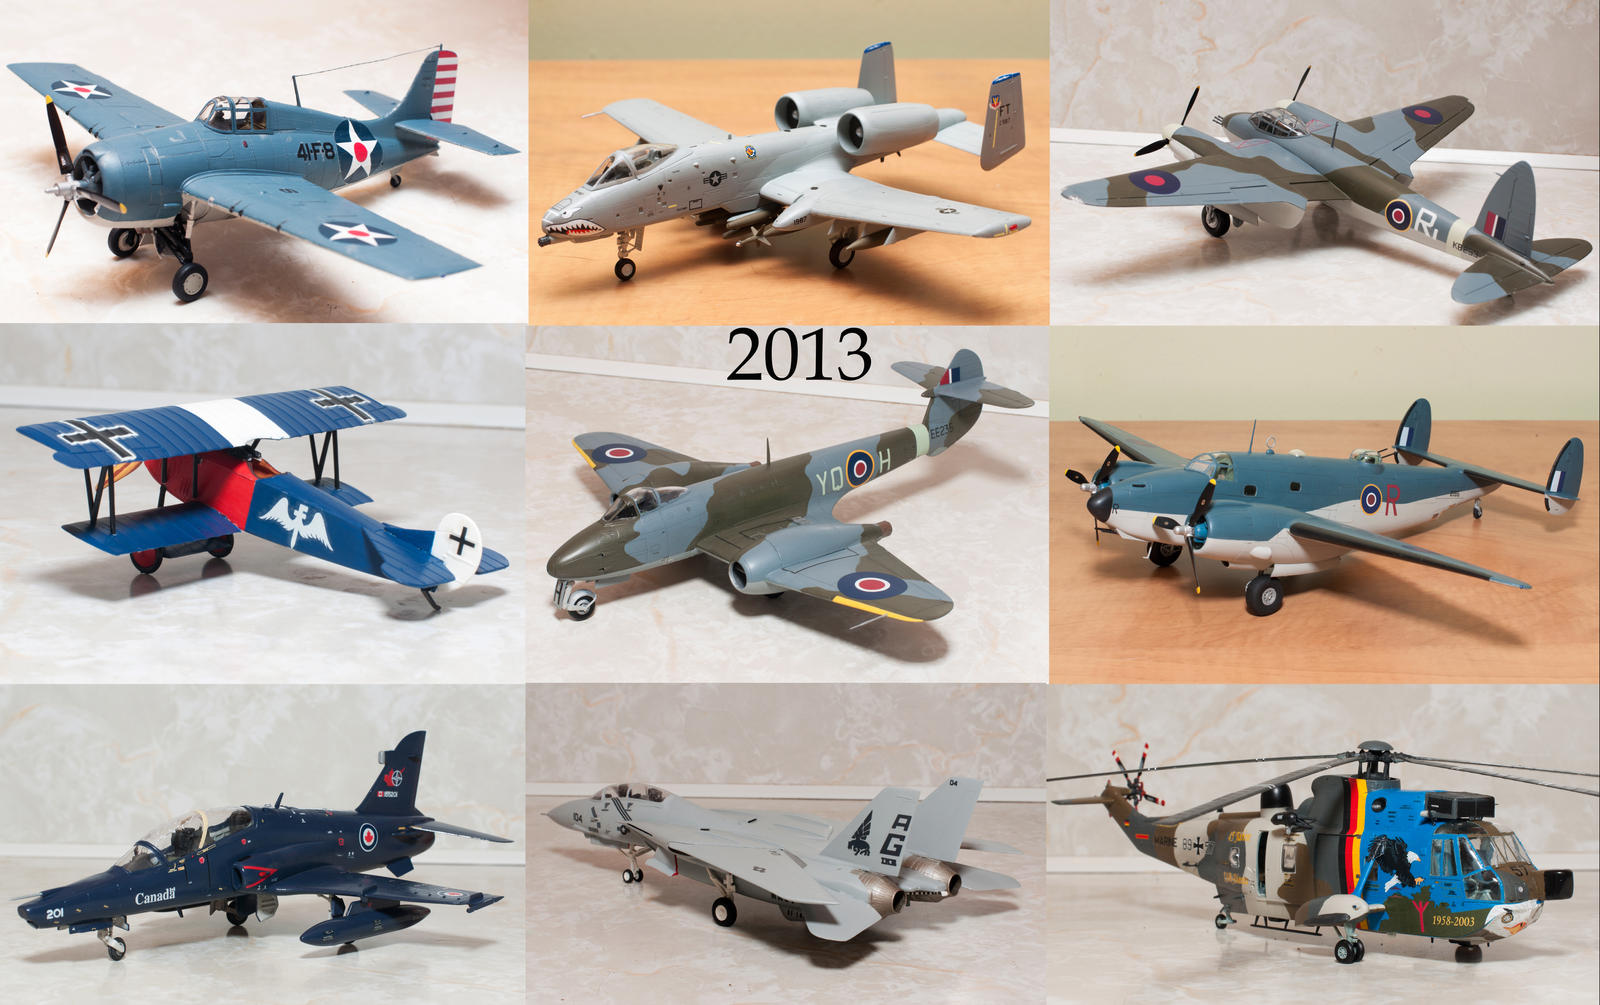 2013 Builds